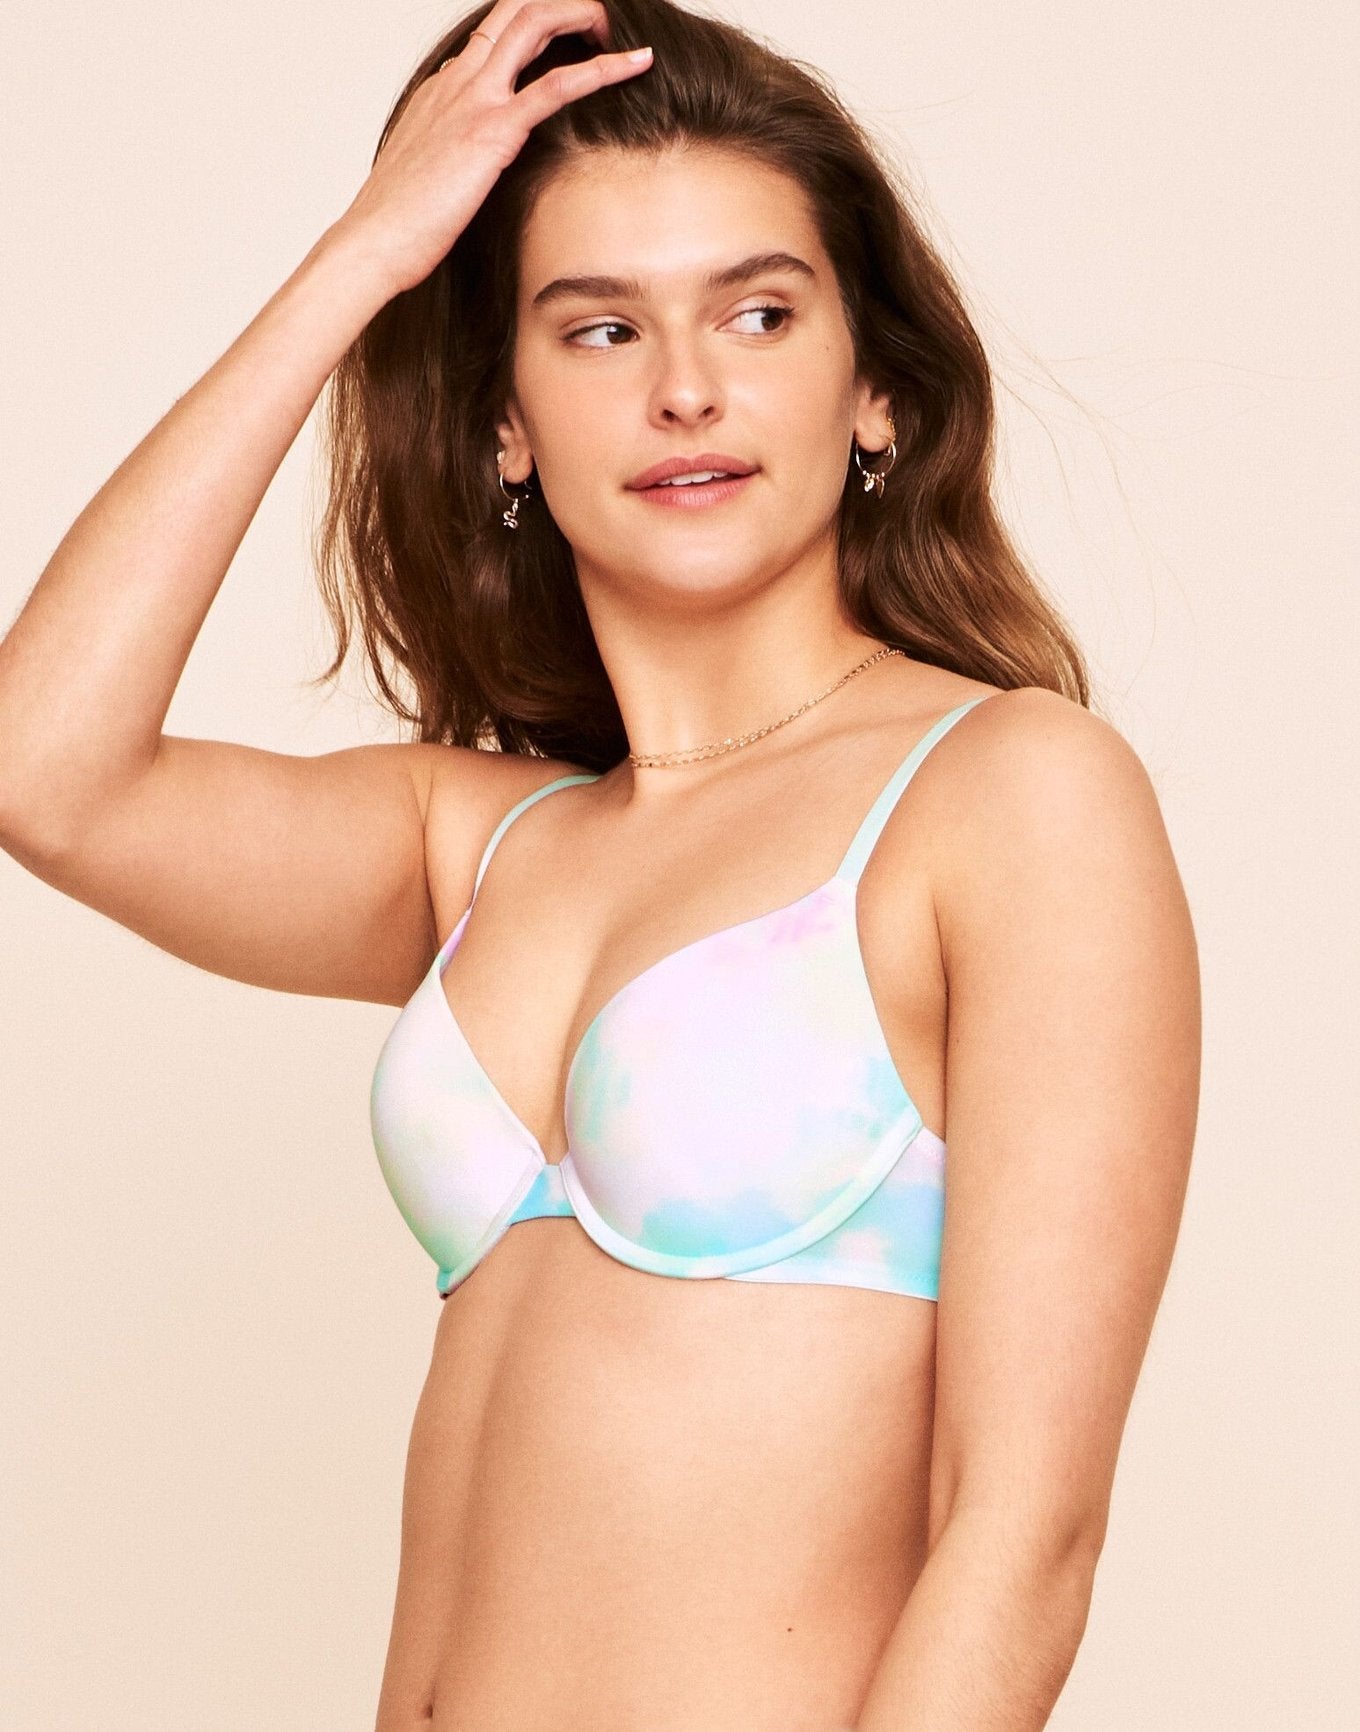 Earth Republic Jordyn Plunge Push Up Bra Push-Up Bra in color Smudged Unicorn and shape plunge